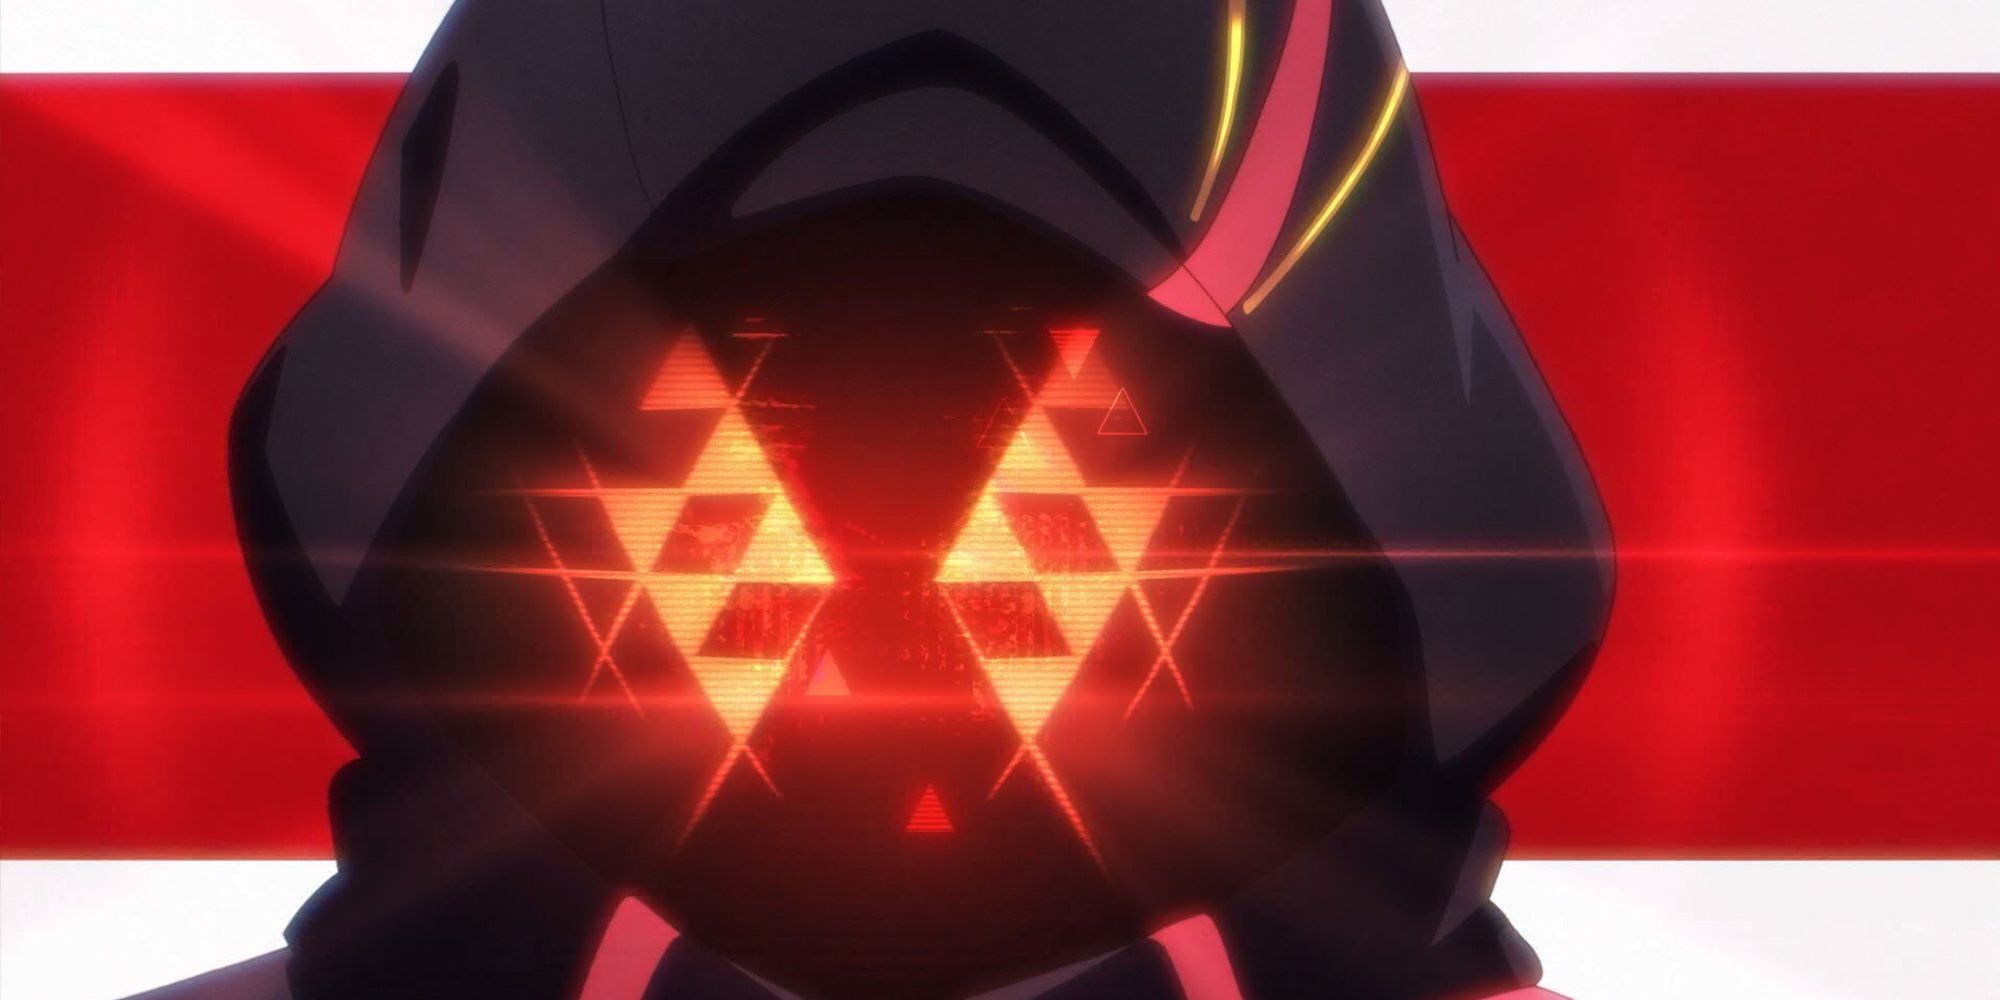 The Scarlet Nexus Hologram Mask As Seen In The Anime Opening